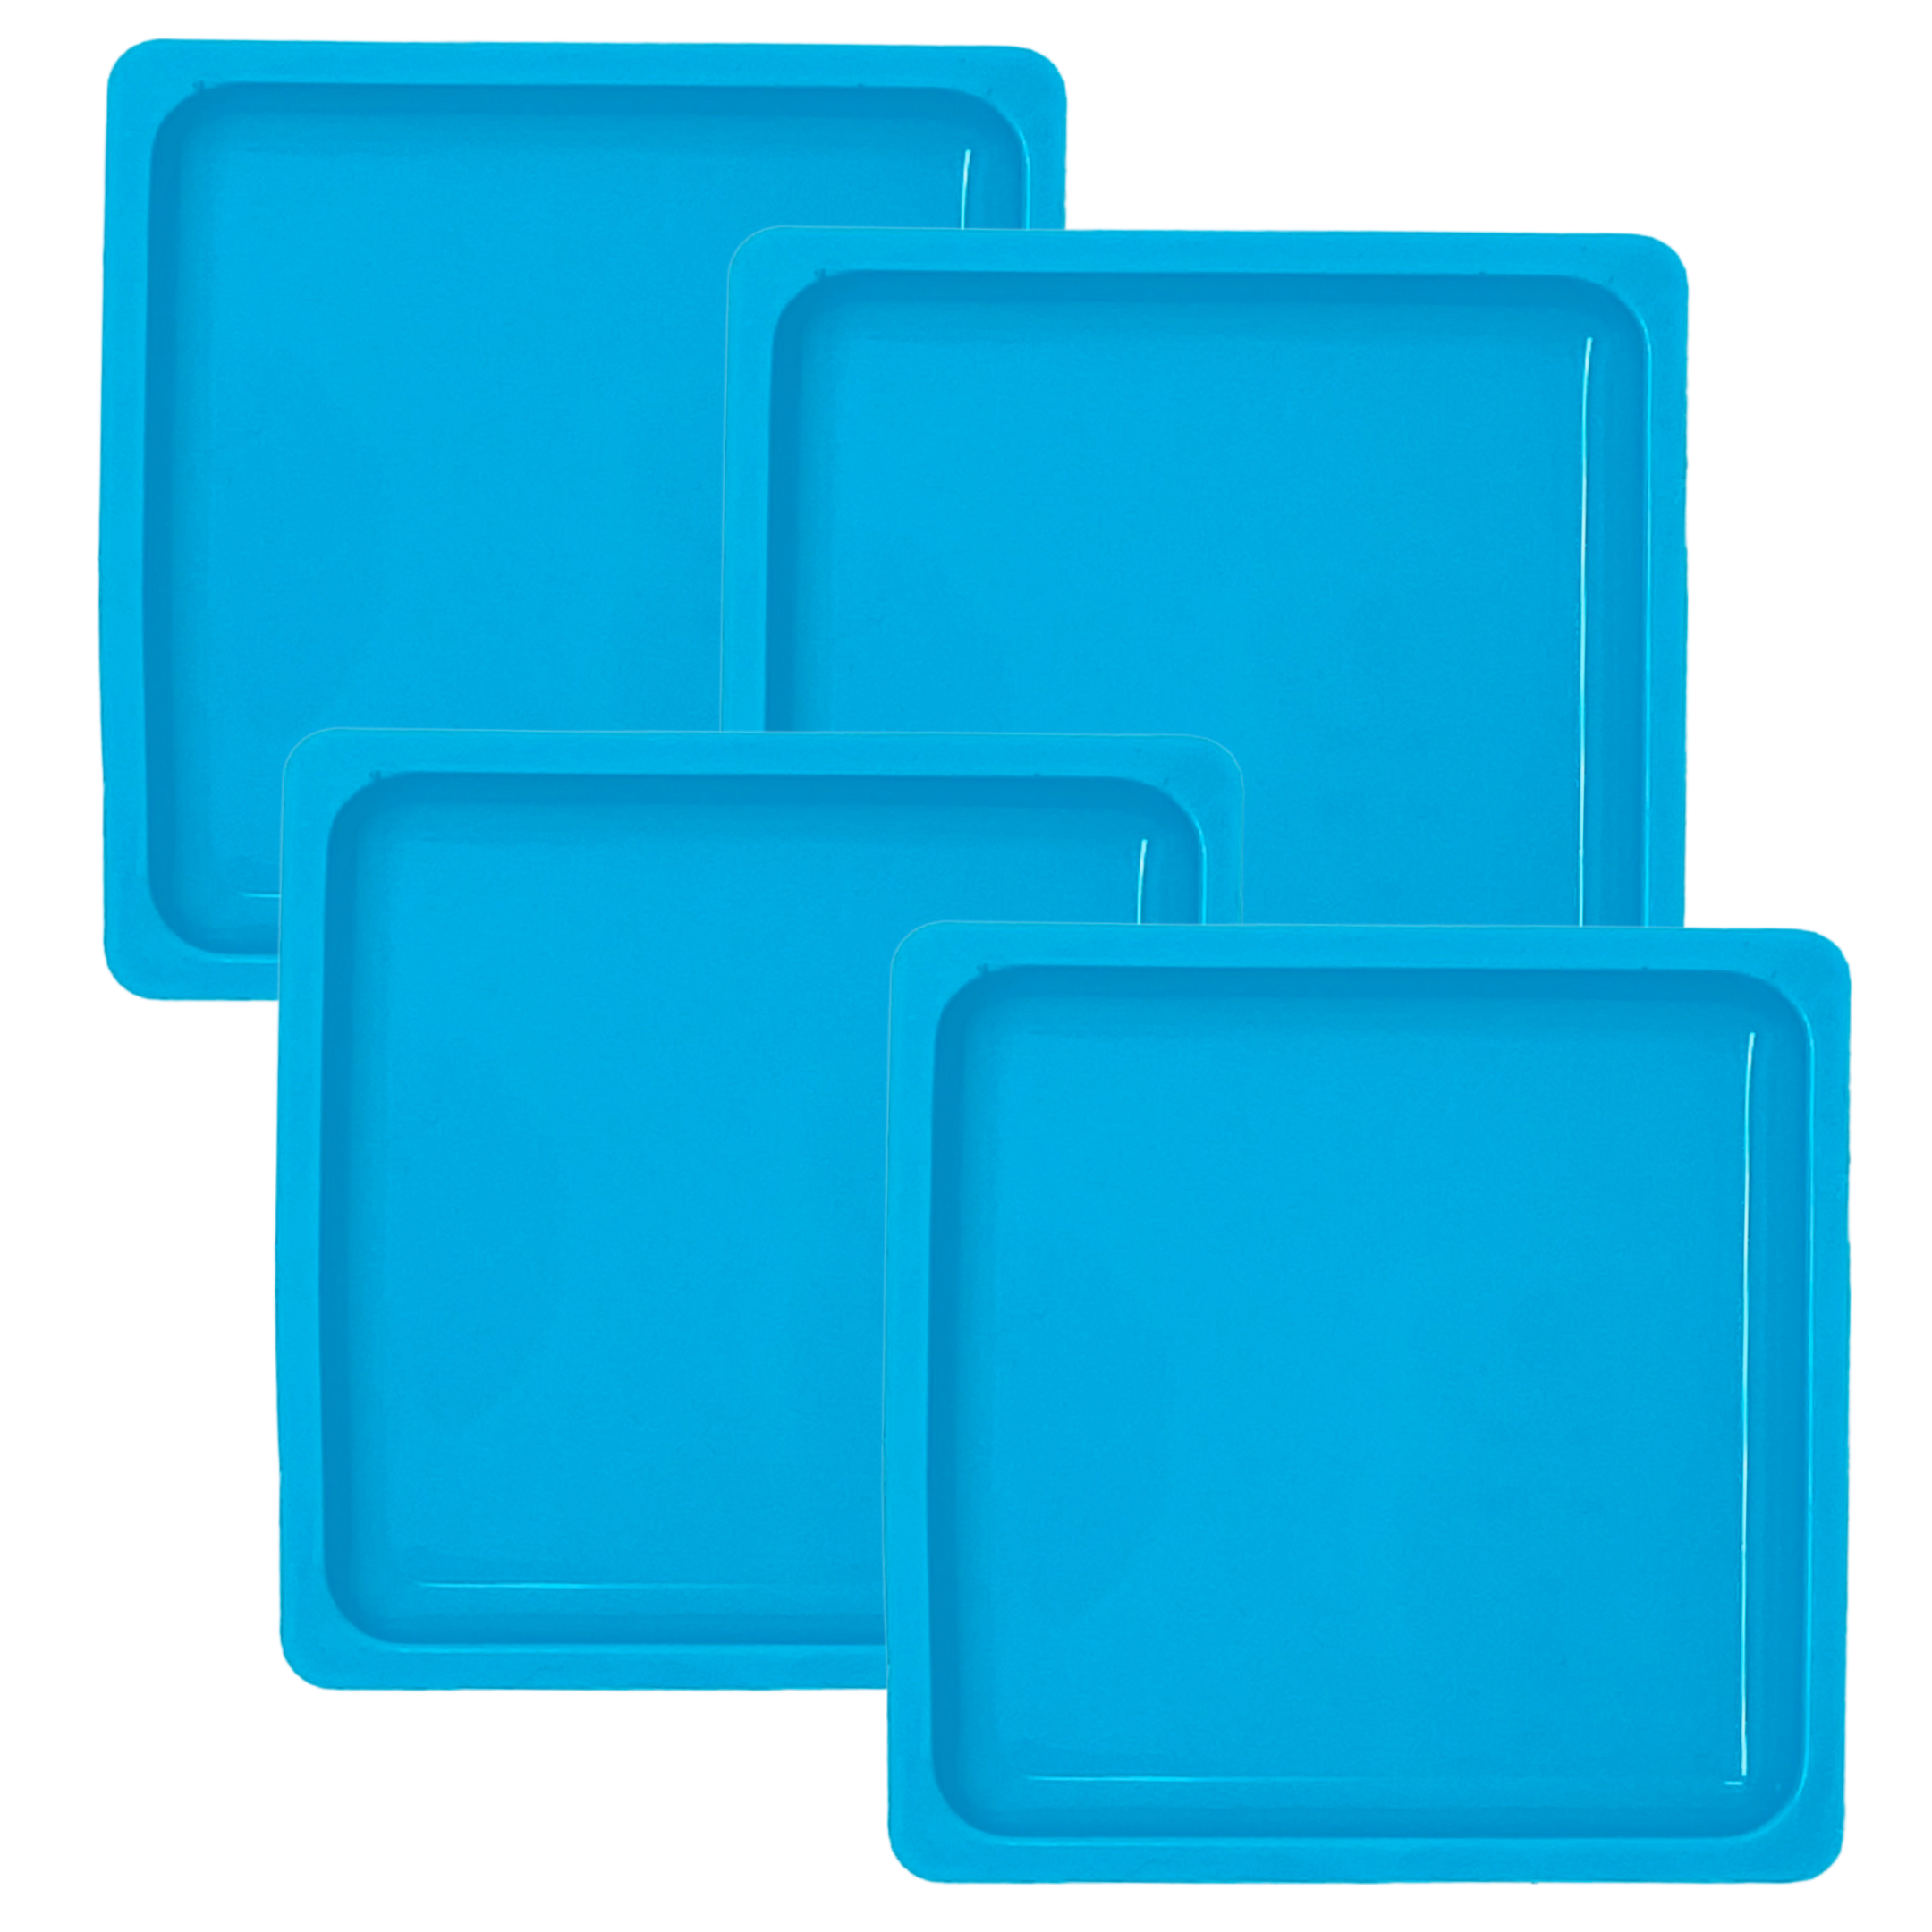 4"  Square Coaster Pack of 4 - The Mould Story